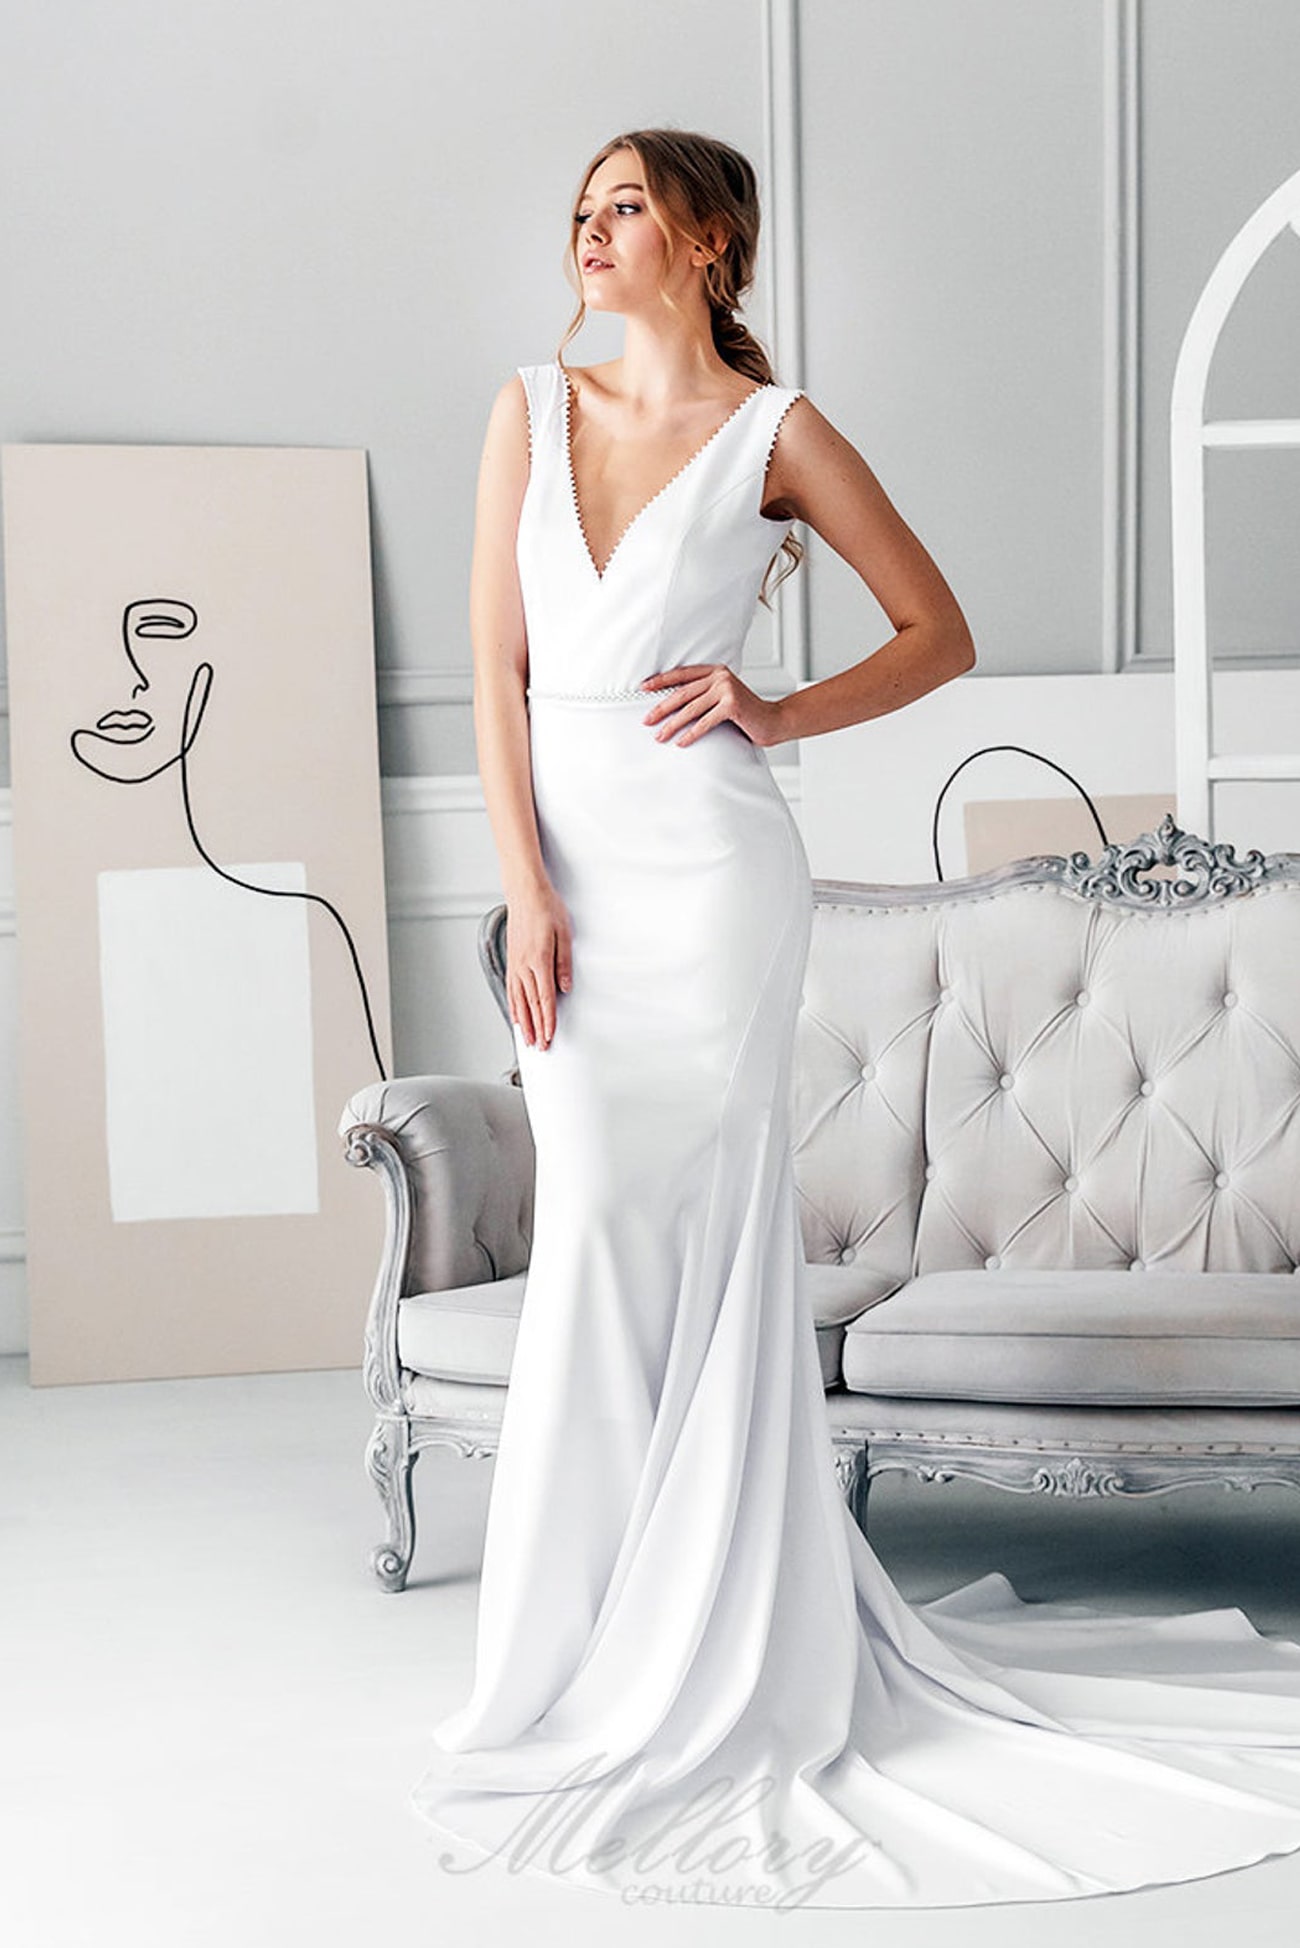 Wedding Dresses for an Inverted Triangle Body #lacelebrant